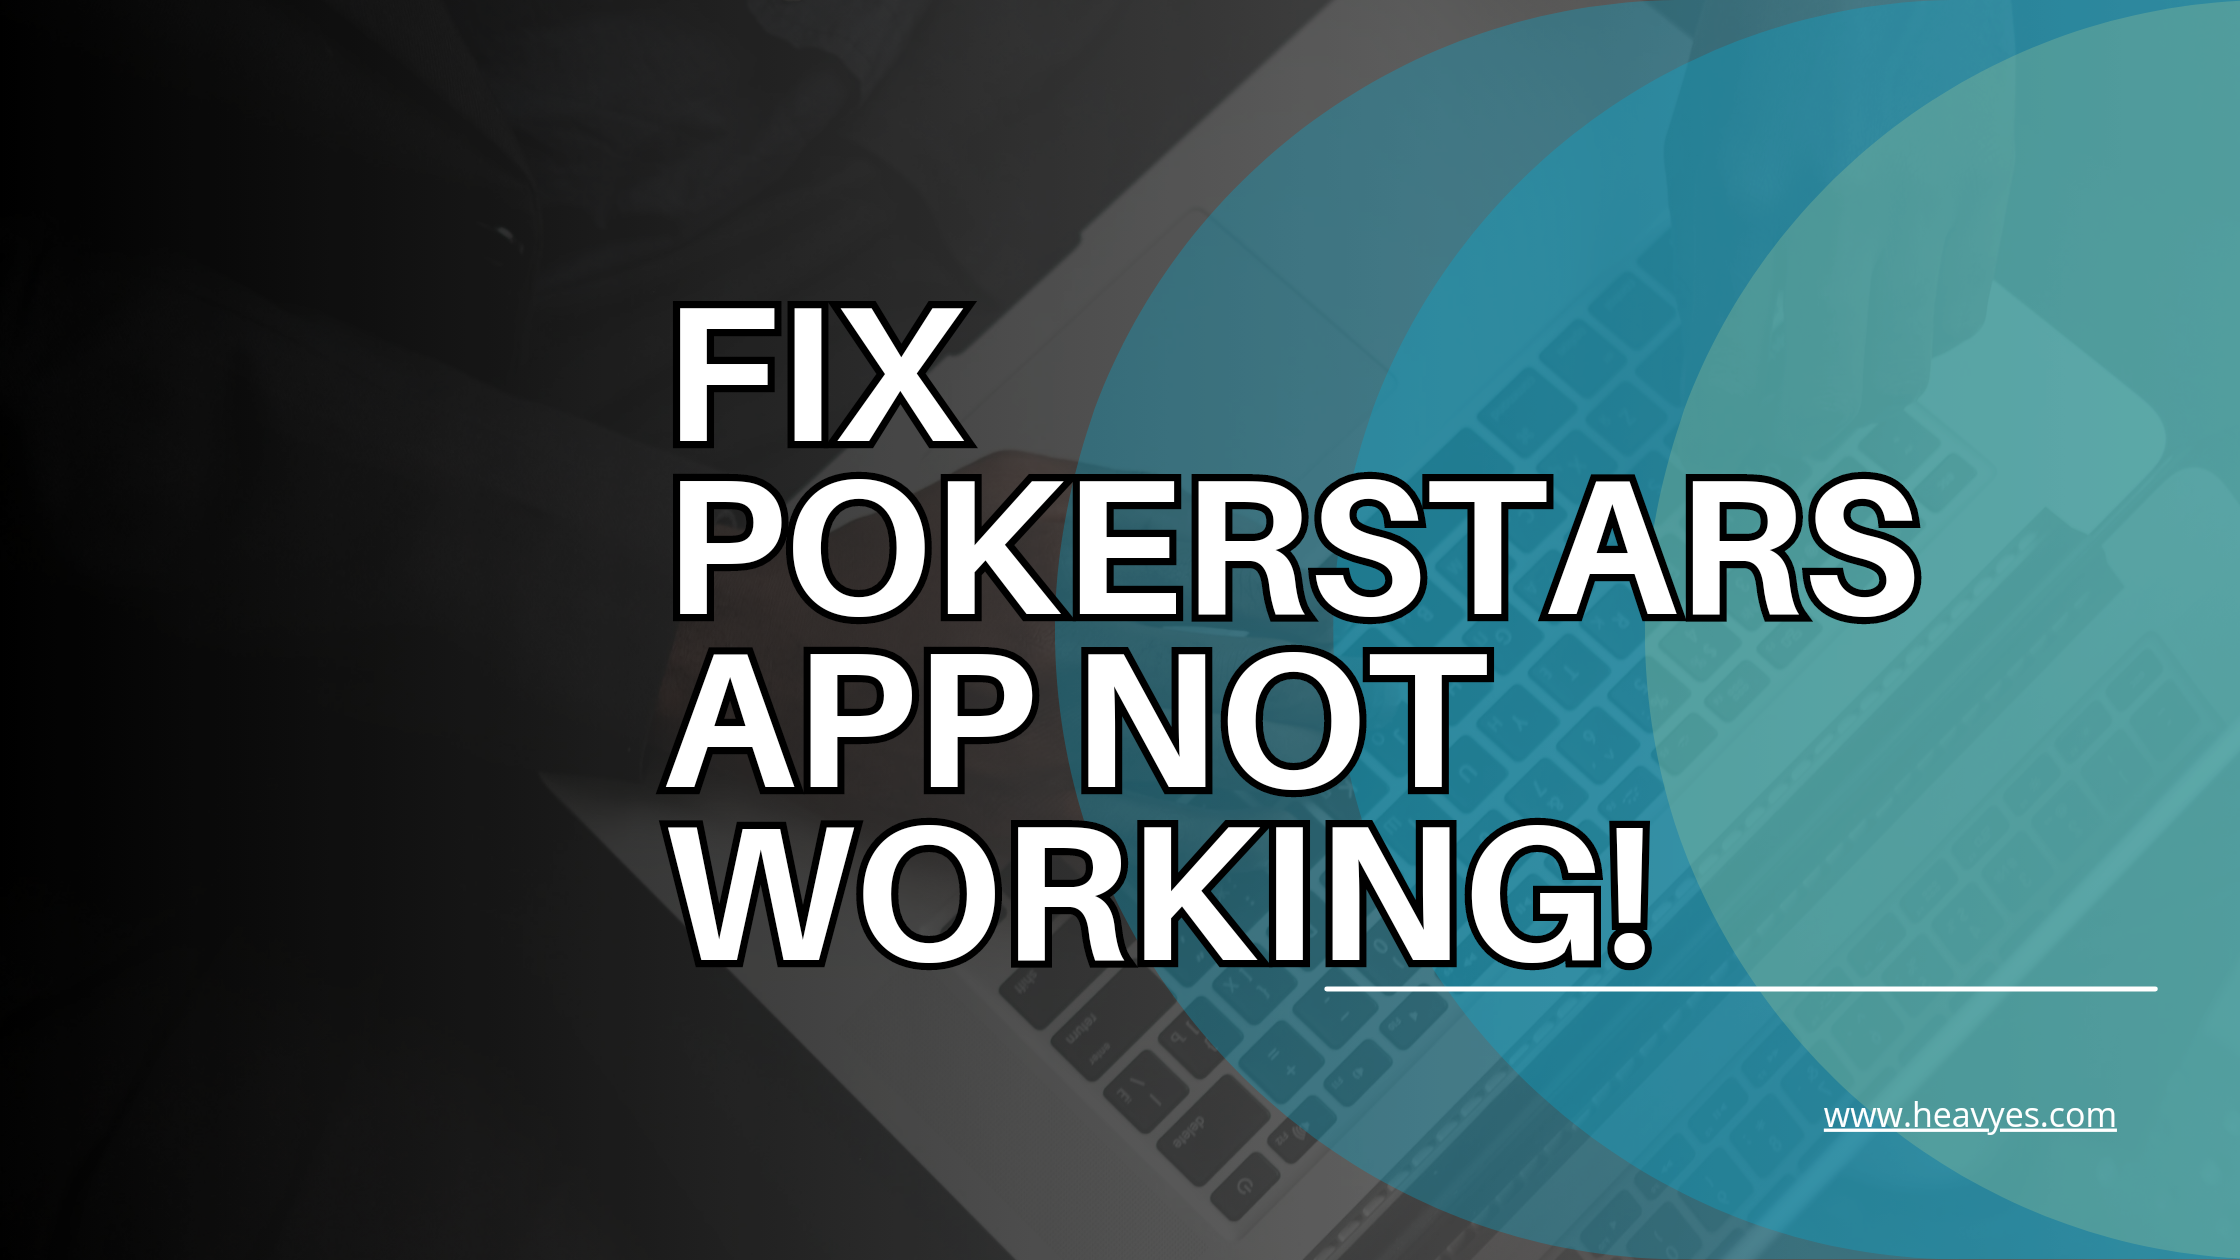 5 Ways To Troubleshoot If Your Pokerstars App Is Not Working